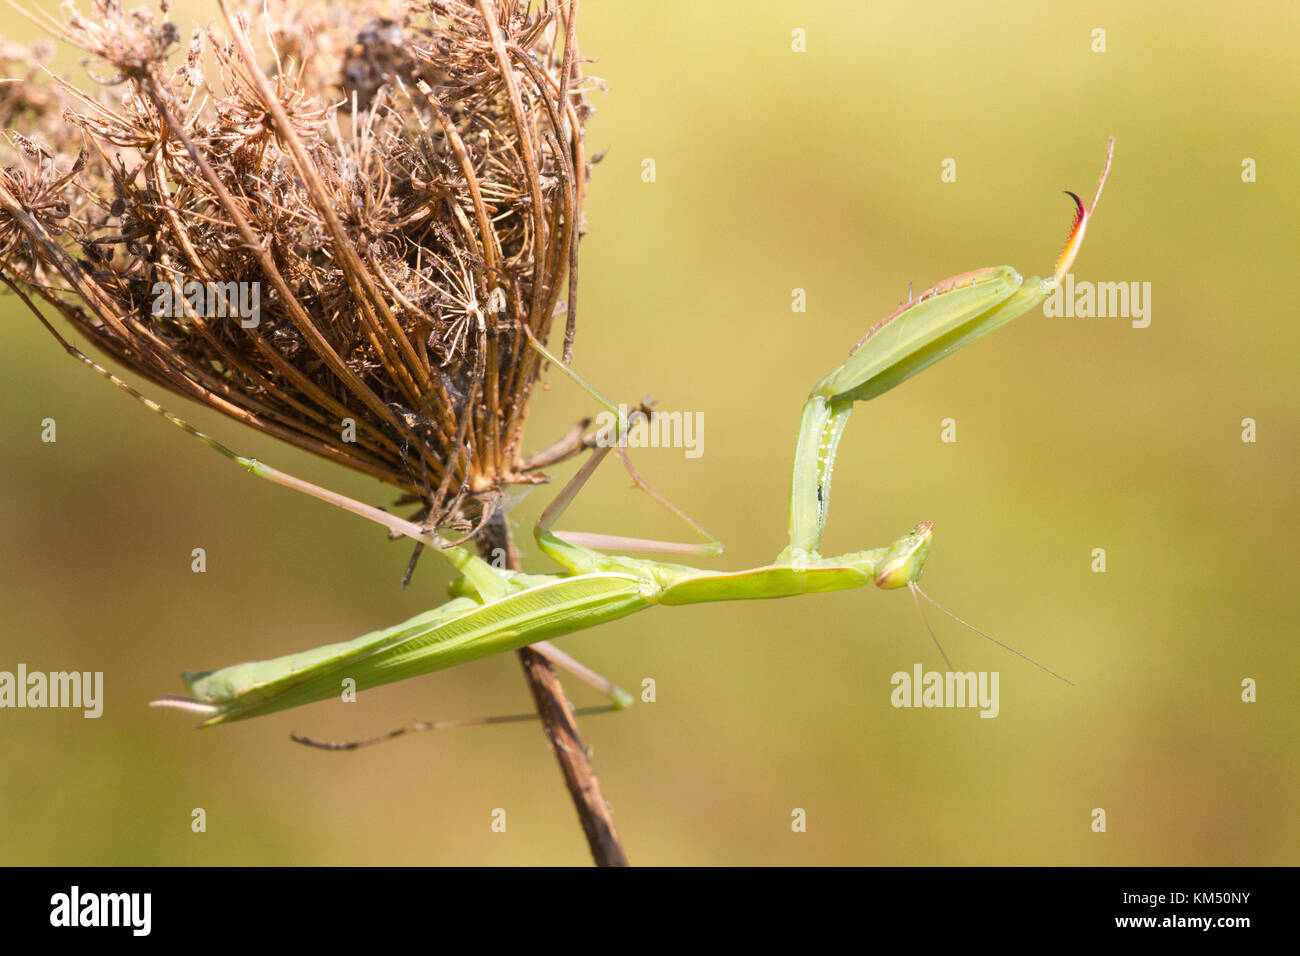 A male praying mantis (Mantis religiosa) is waiting for a prey on dead grass, Stock Photo